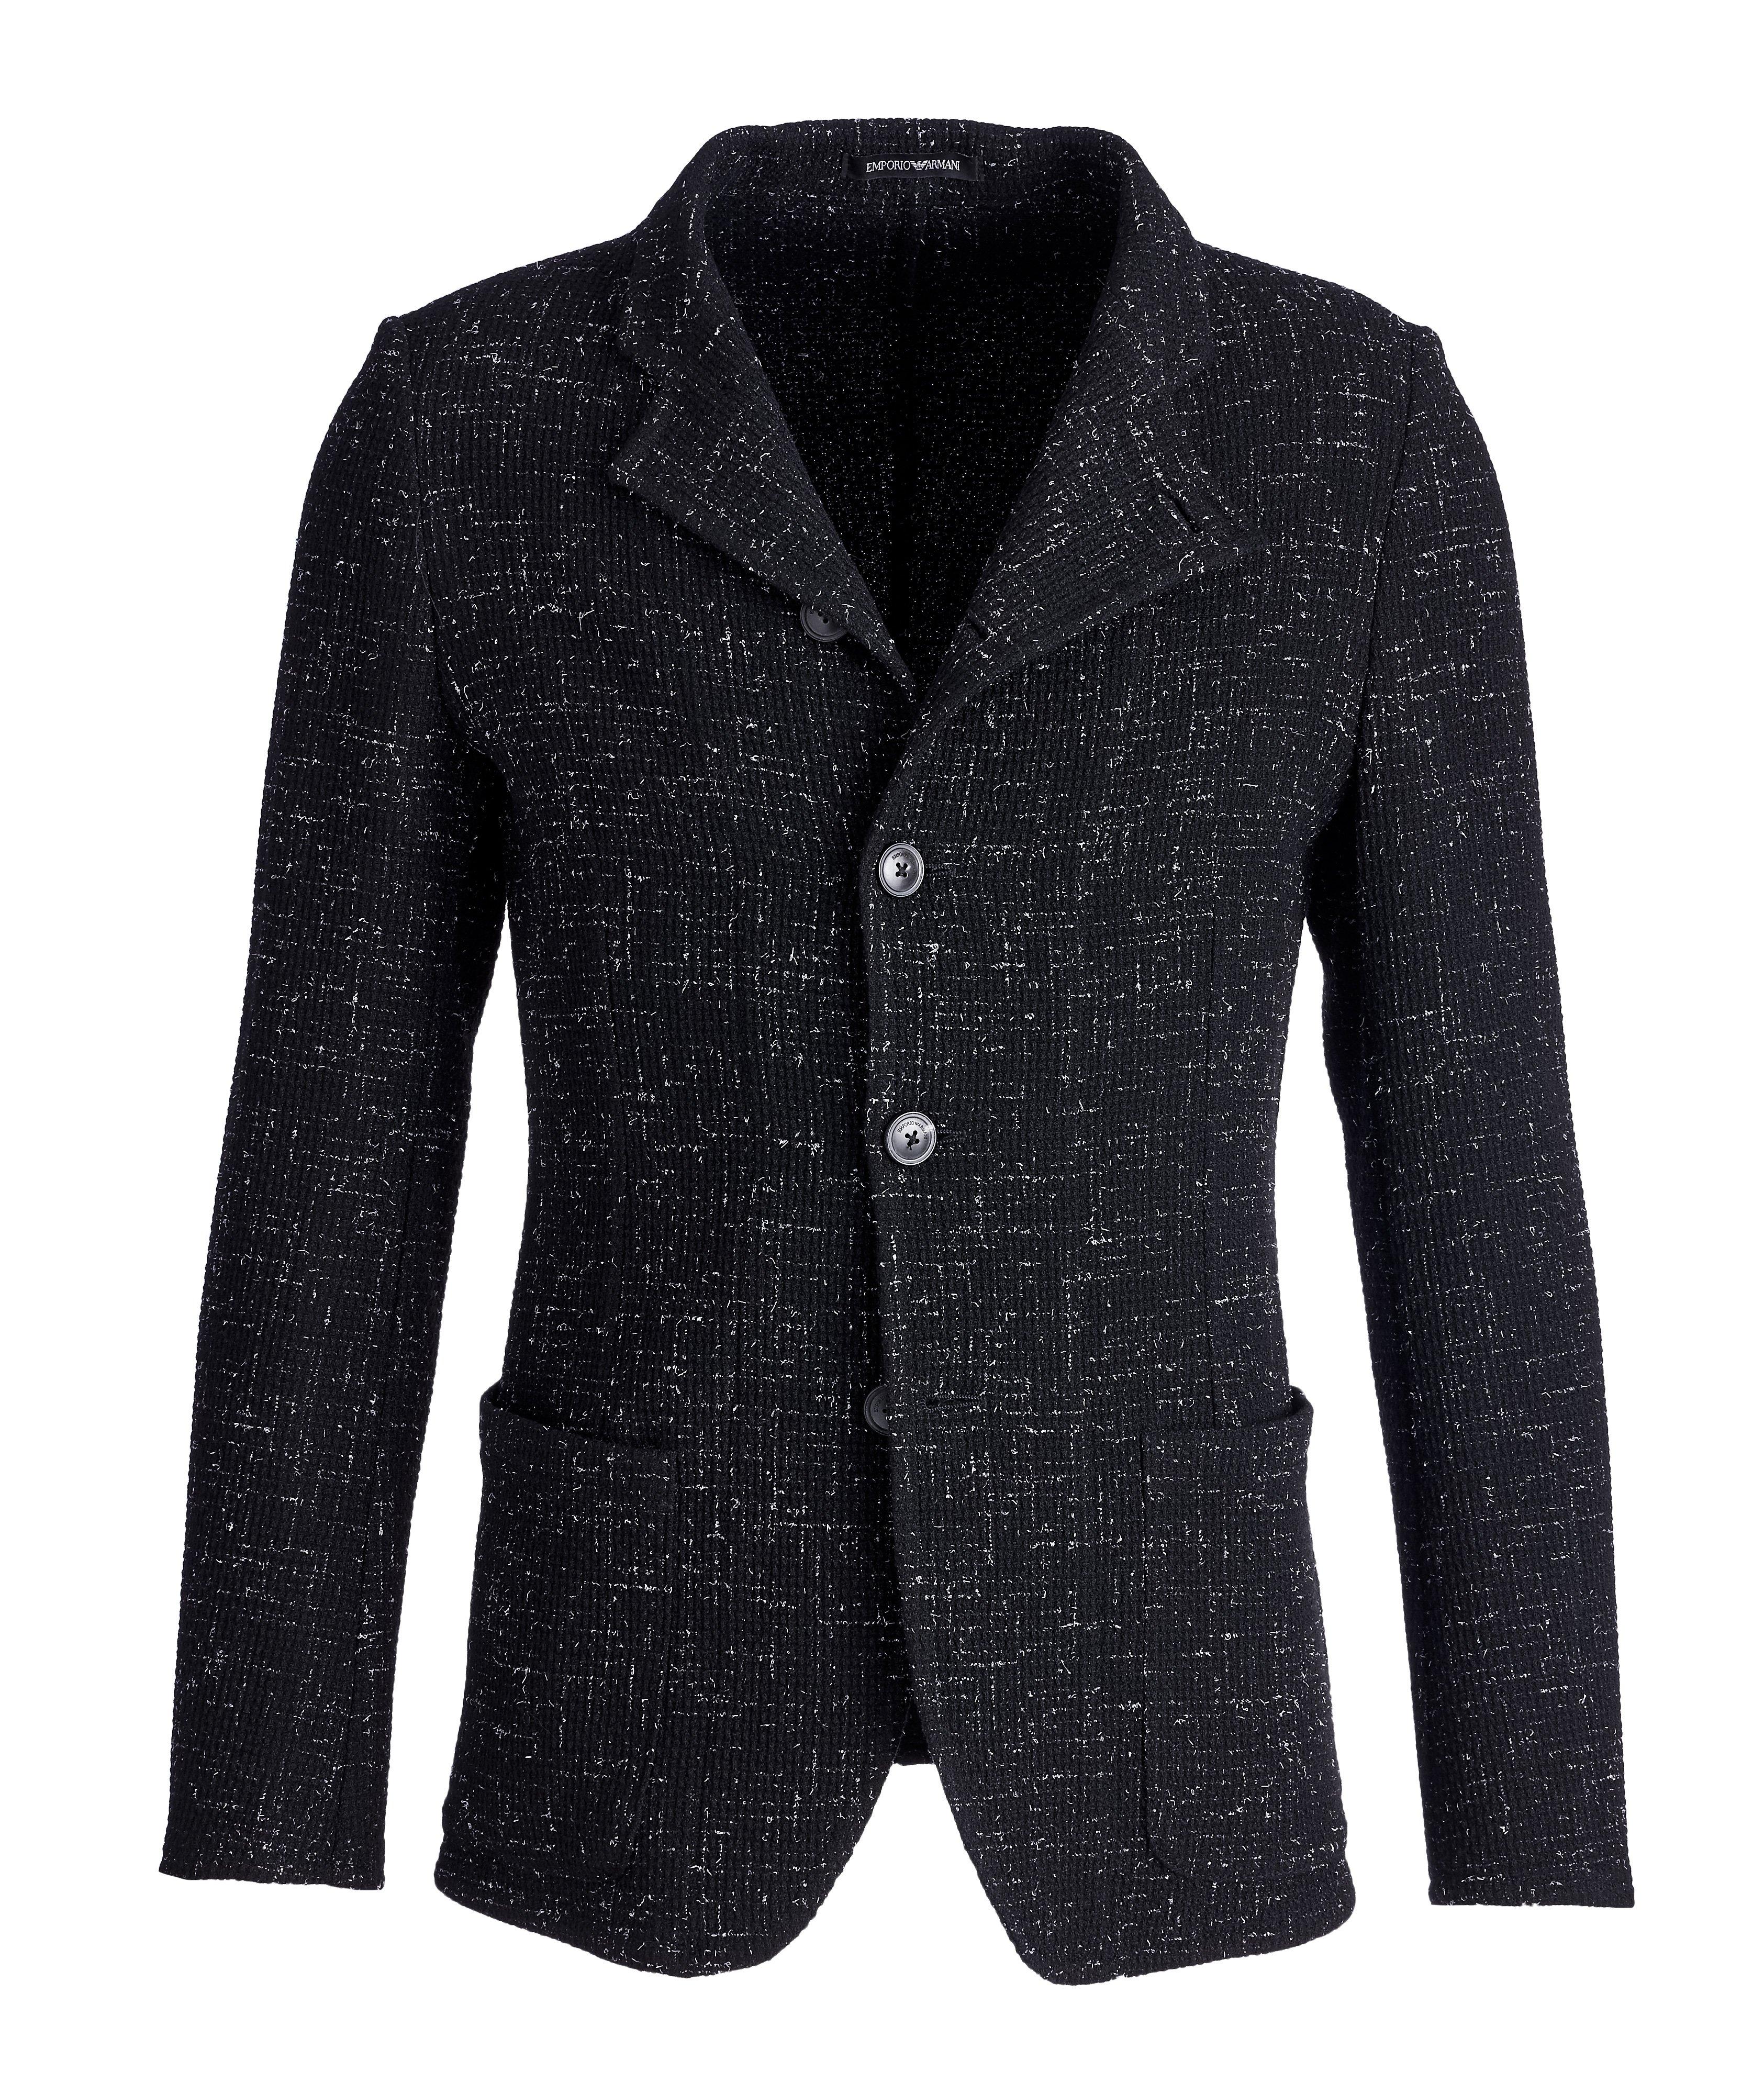 Unstructured Stretch-Wool Sports Jacket image 0